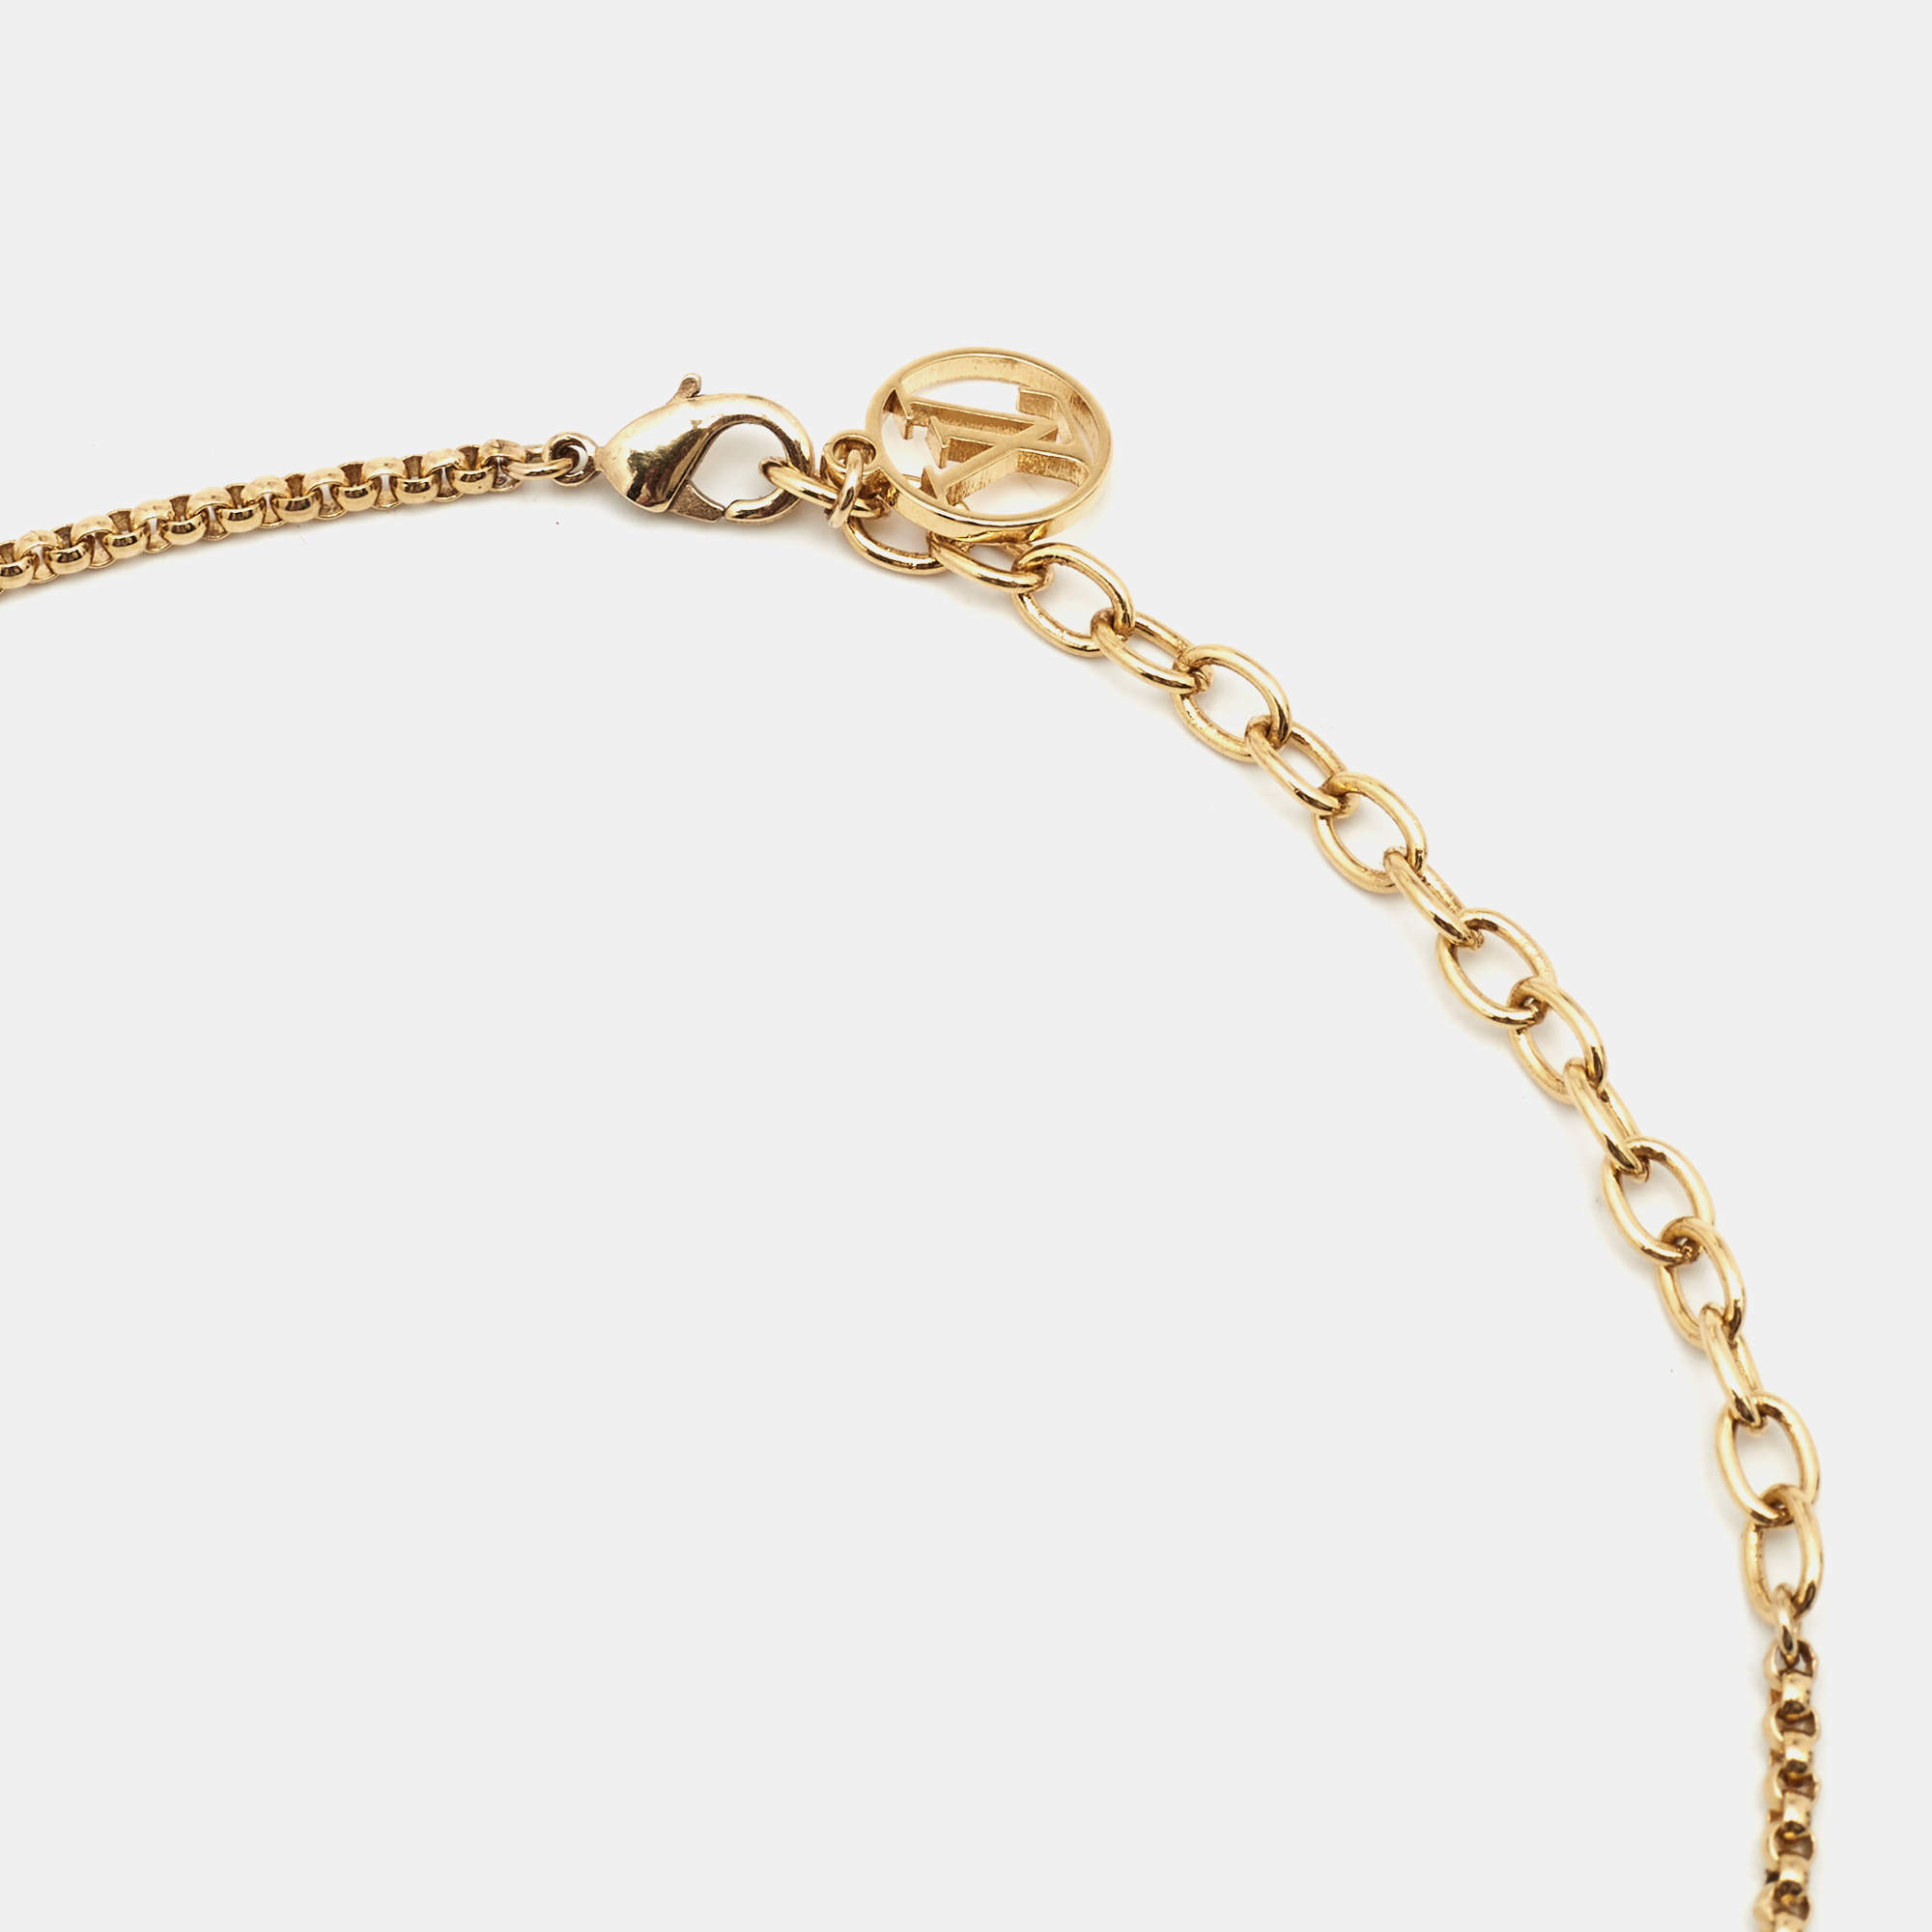 Louis Vuitton Louise By Night Crystals Gold Tone Necklace Louis Vuitton